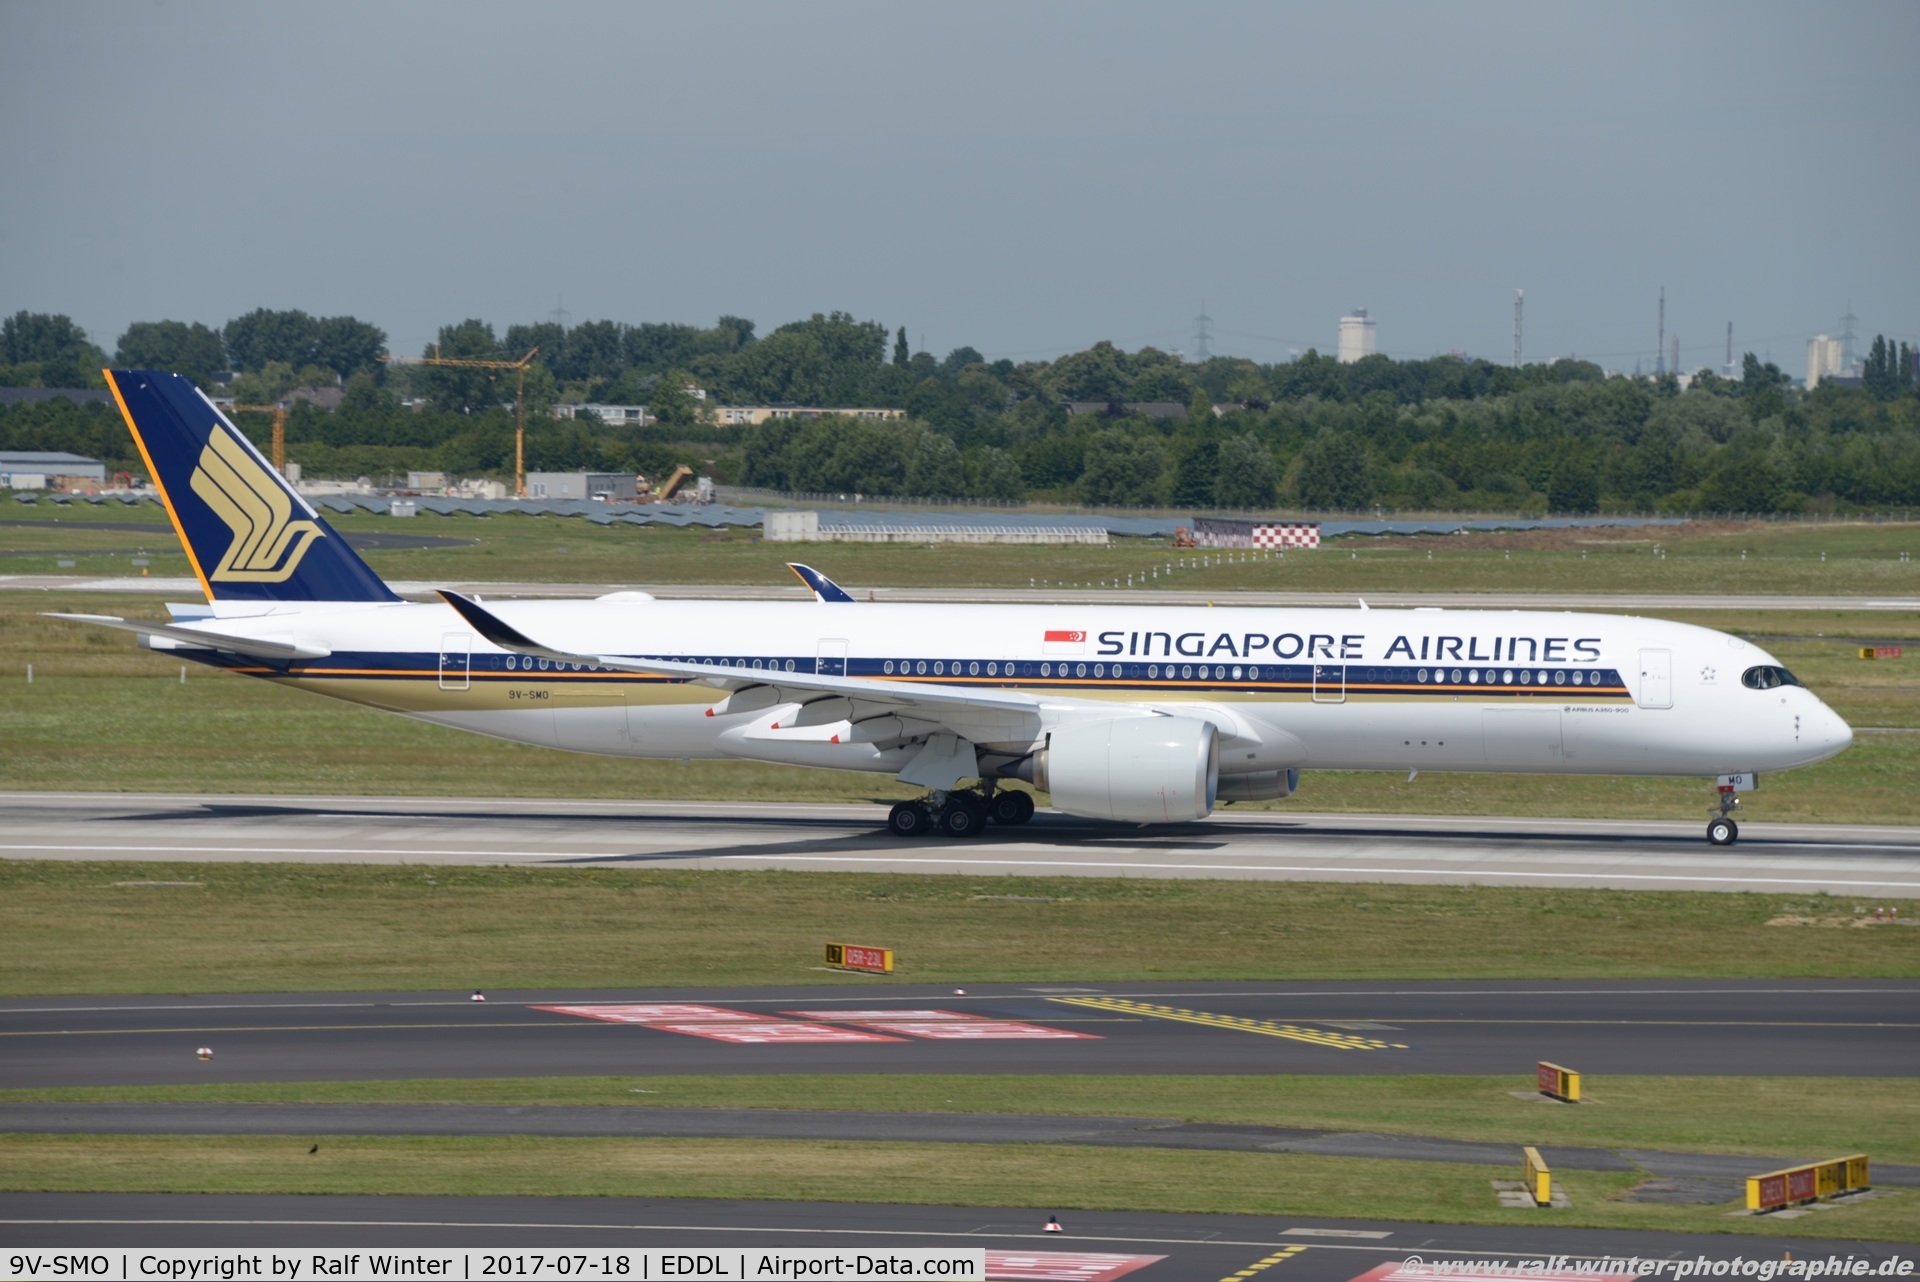 9V-SMO, 2017 Airbus A350-941 C/N 116, Airbus A350-941 - SQ SIA Singapore Airlines - 116 - 9V-SMO - 18.07.2017 - DUS